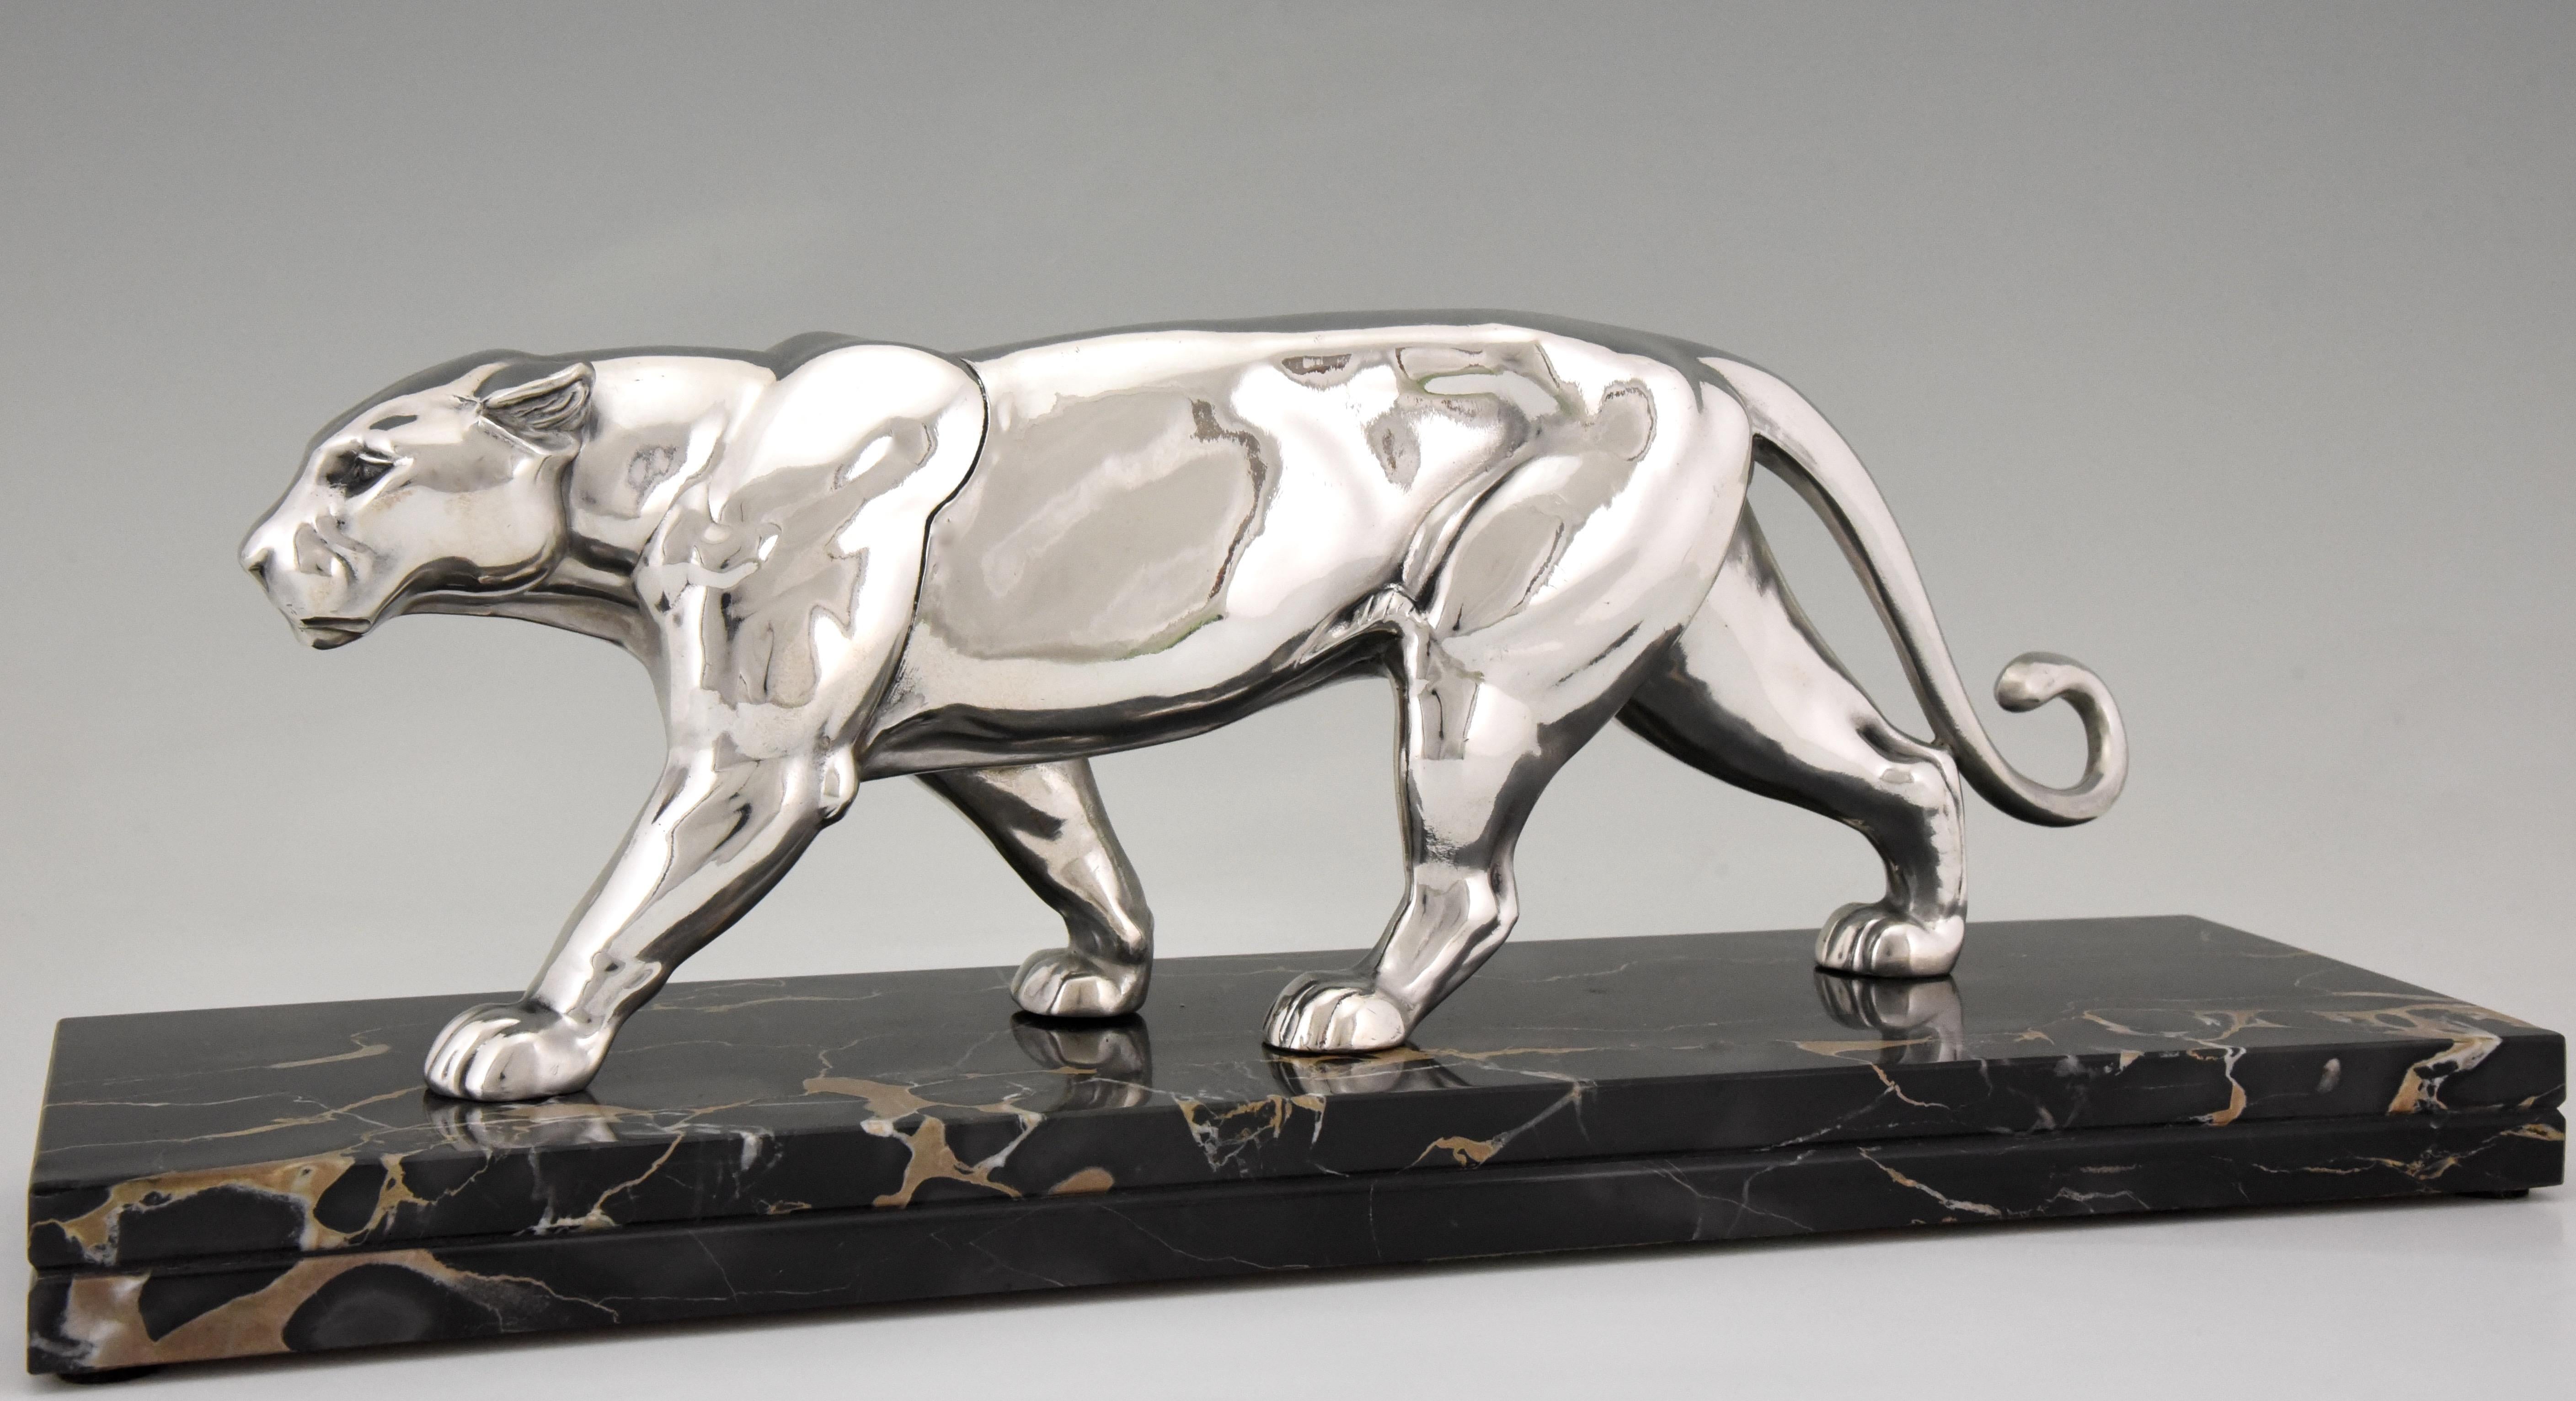 Art Deco sculpture of a panther by Alexandre Ouline. The silvered art metal sculpture stands on a Portor marble base, France, 1930.
Literature:
“Animals in bronze” by Christopher Payne. Antique collectors club. ?“Dictionnaire des peintres,